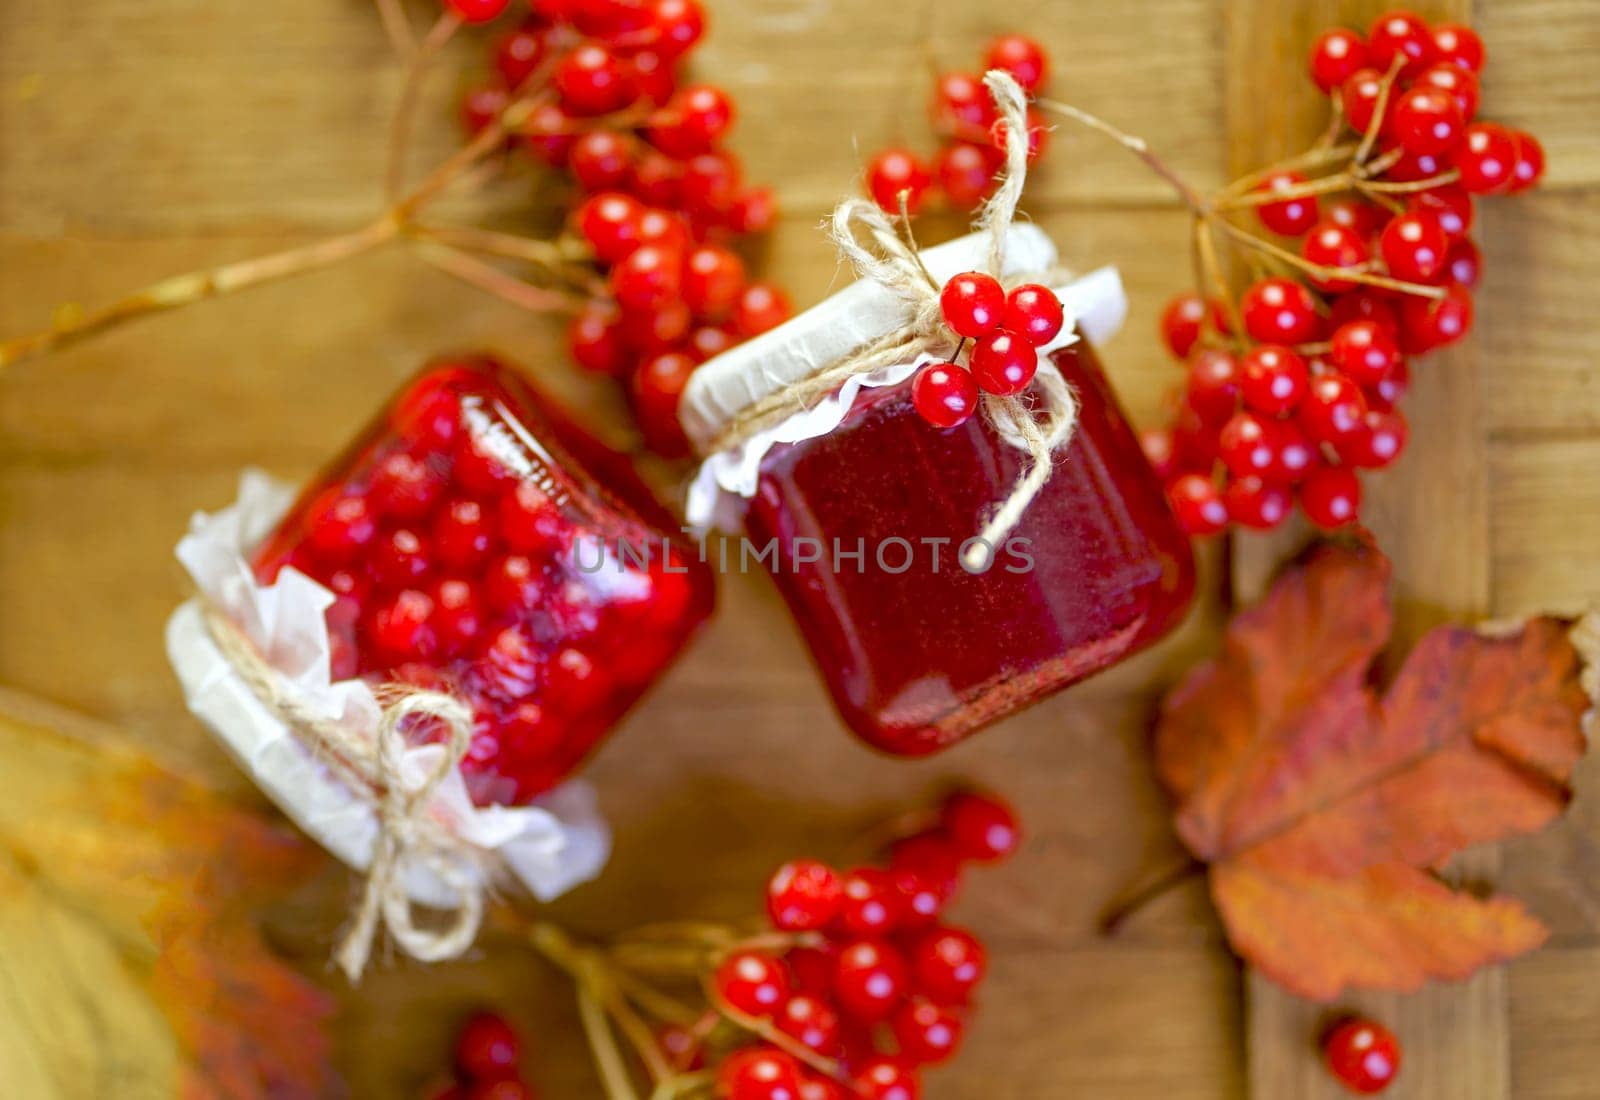 viburnum jam. Red juicy berries of a viburnum with sugar in a glass jar on a dark wooden background. For making jam, tea. Medicinal plant. by aprilphoto